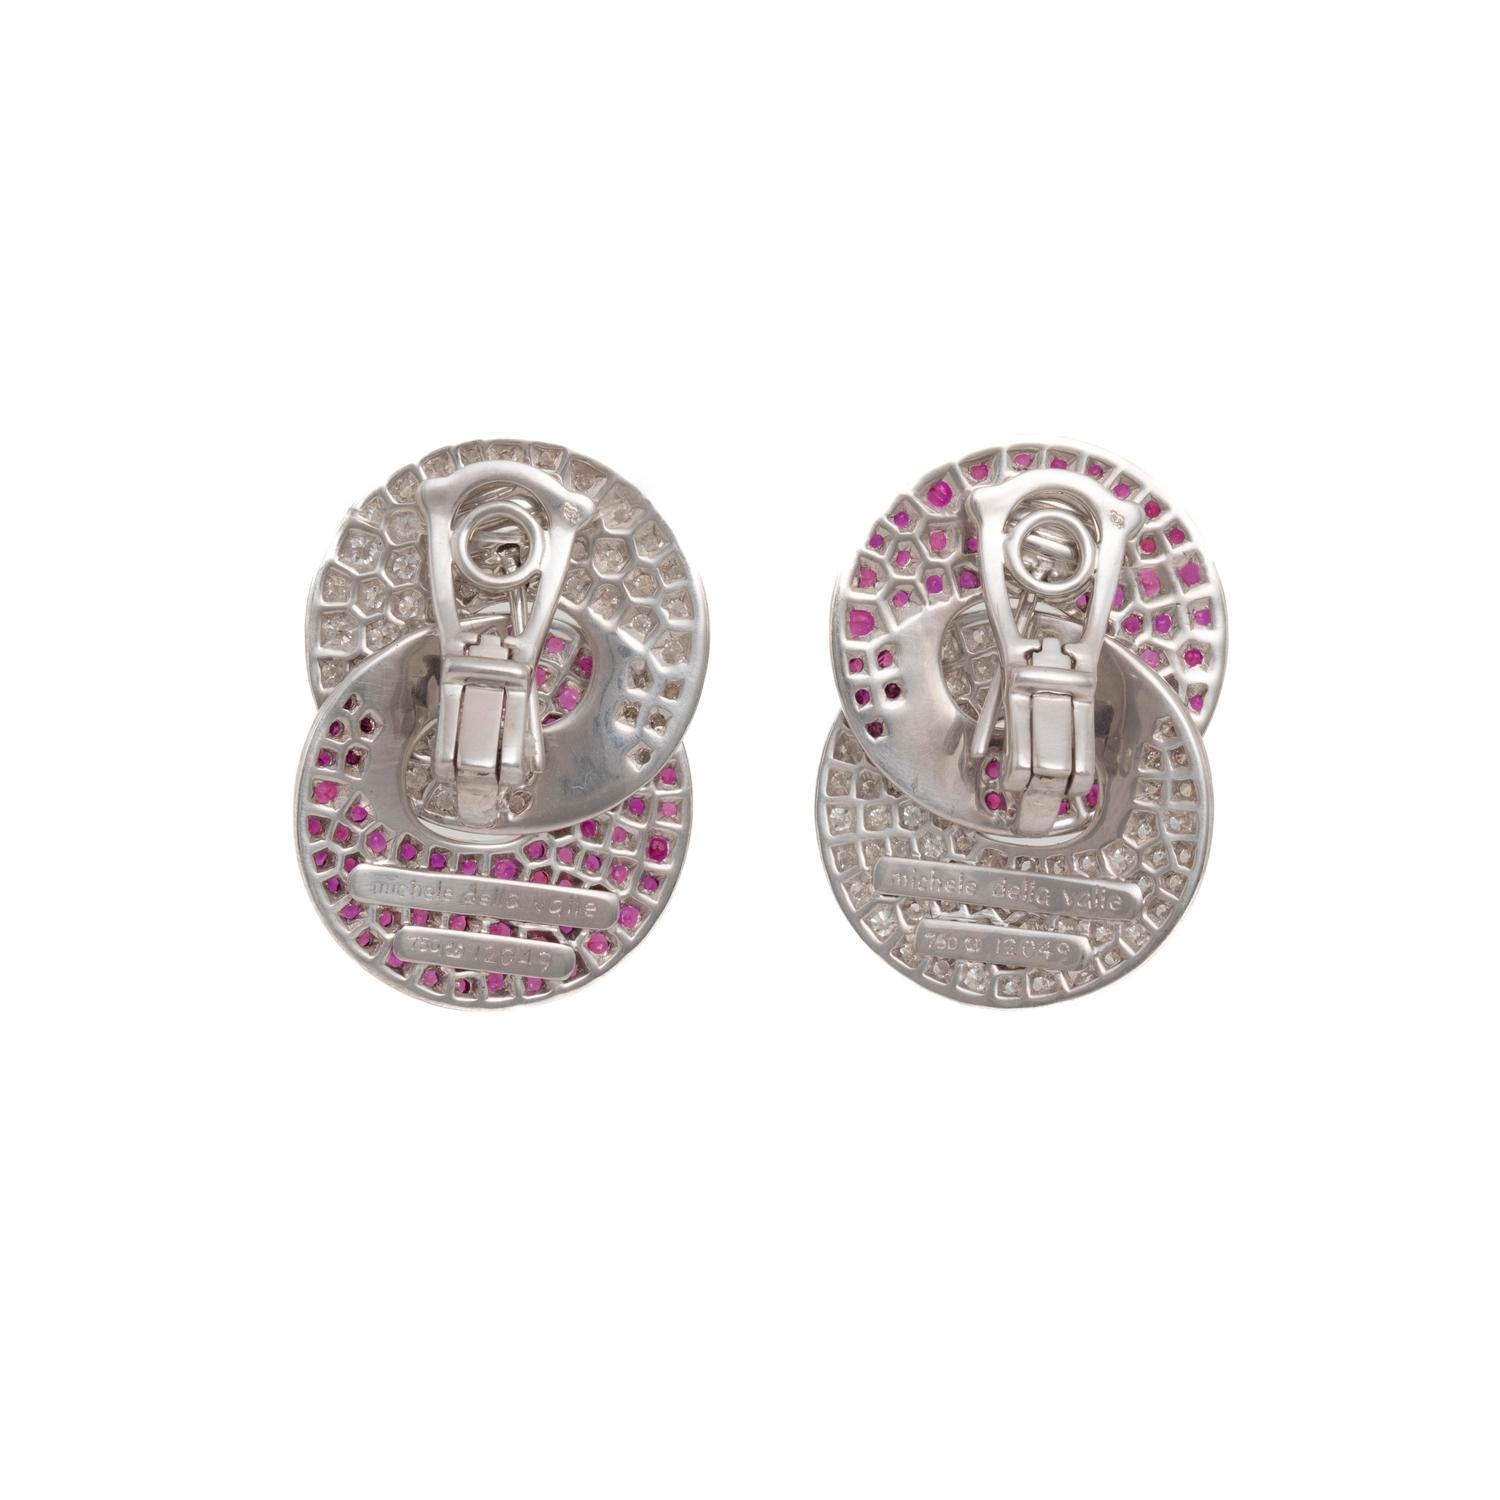 Elegant oval clip-on earrings with silver-tone base and pink crystals.